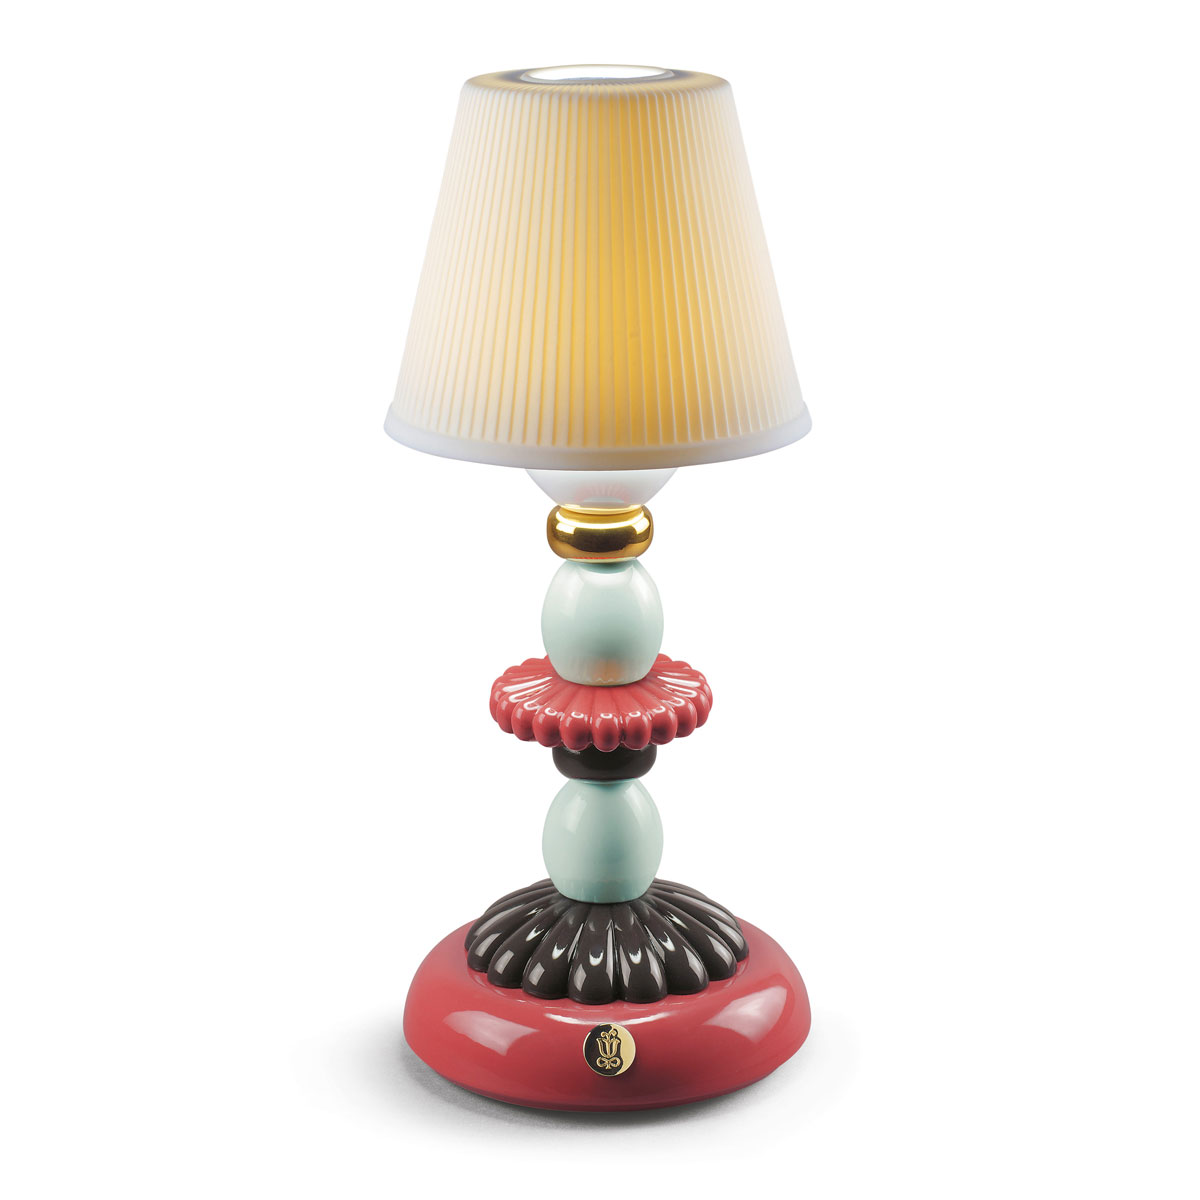 Lladro Light And Fragrance, Lotus Firefly Golden Fall Table Lamp. Red Coral